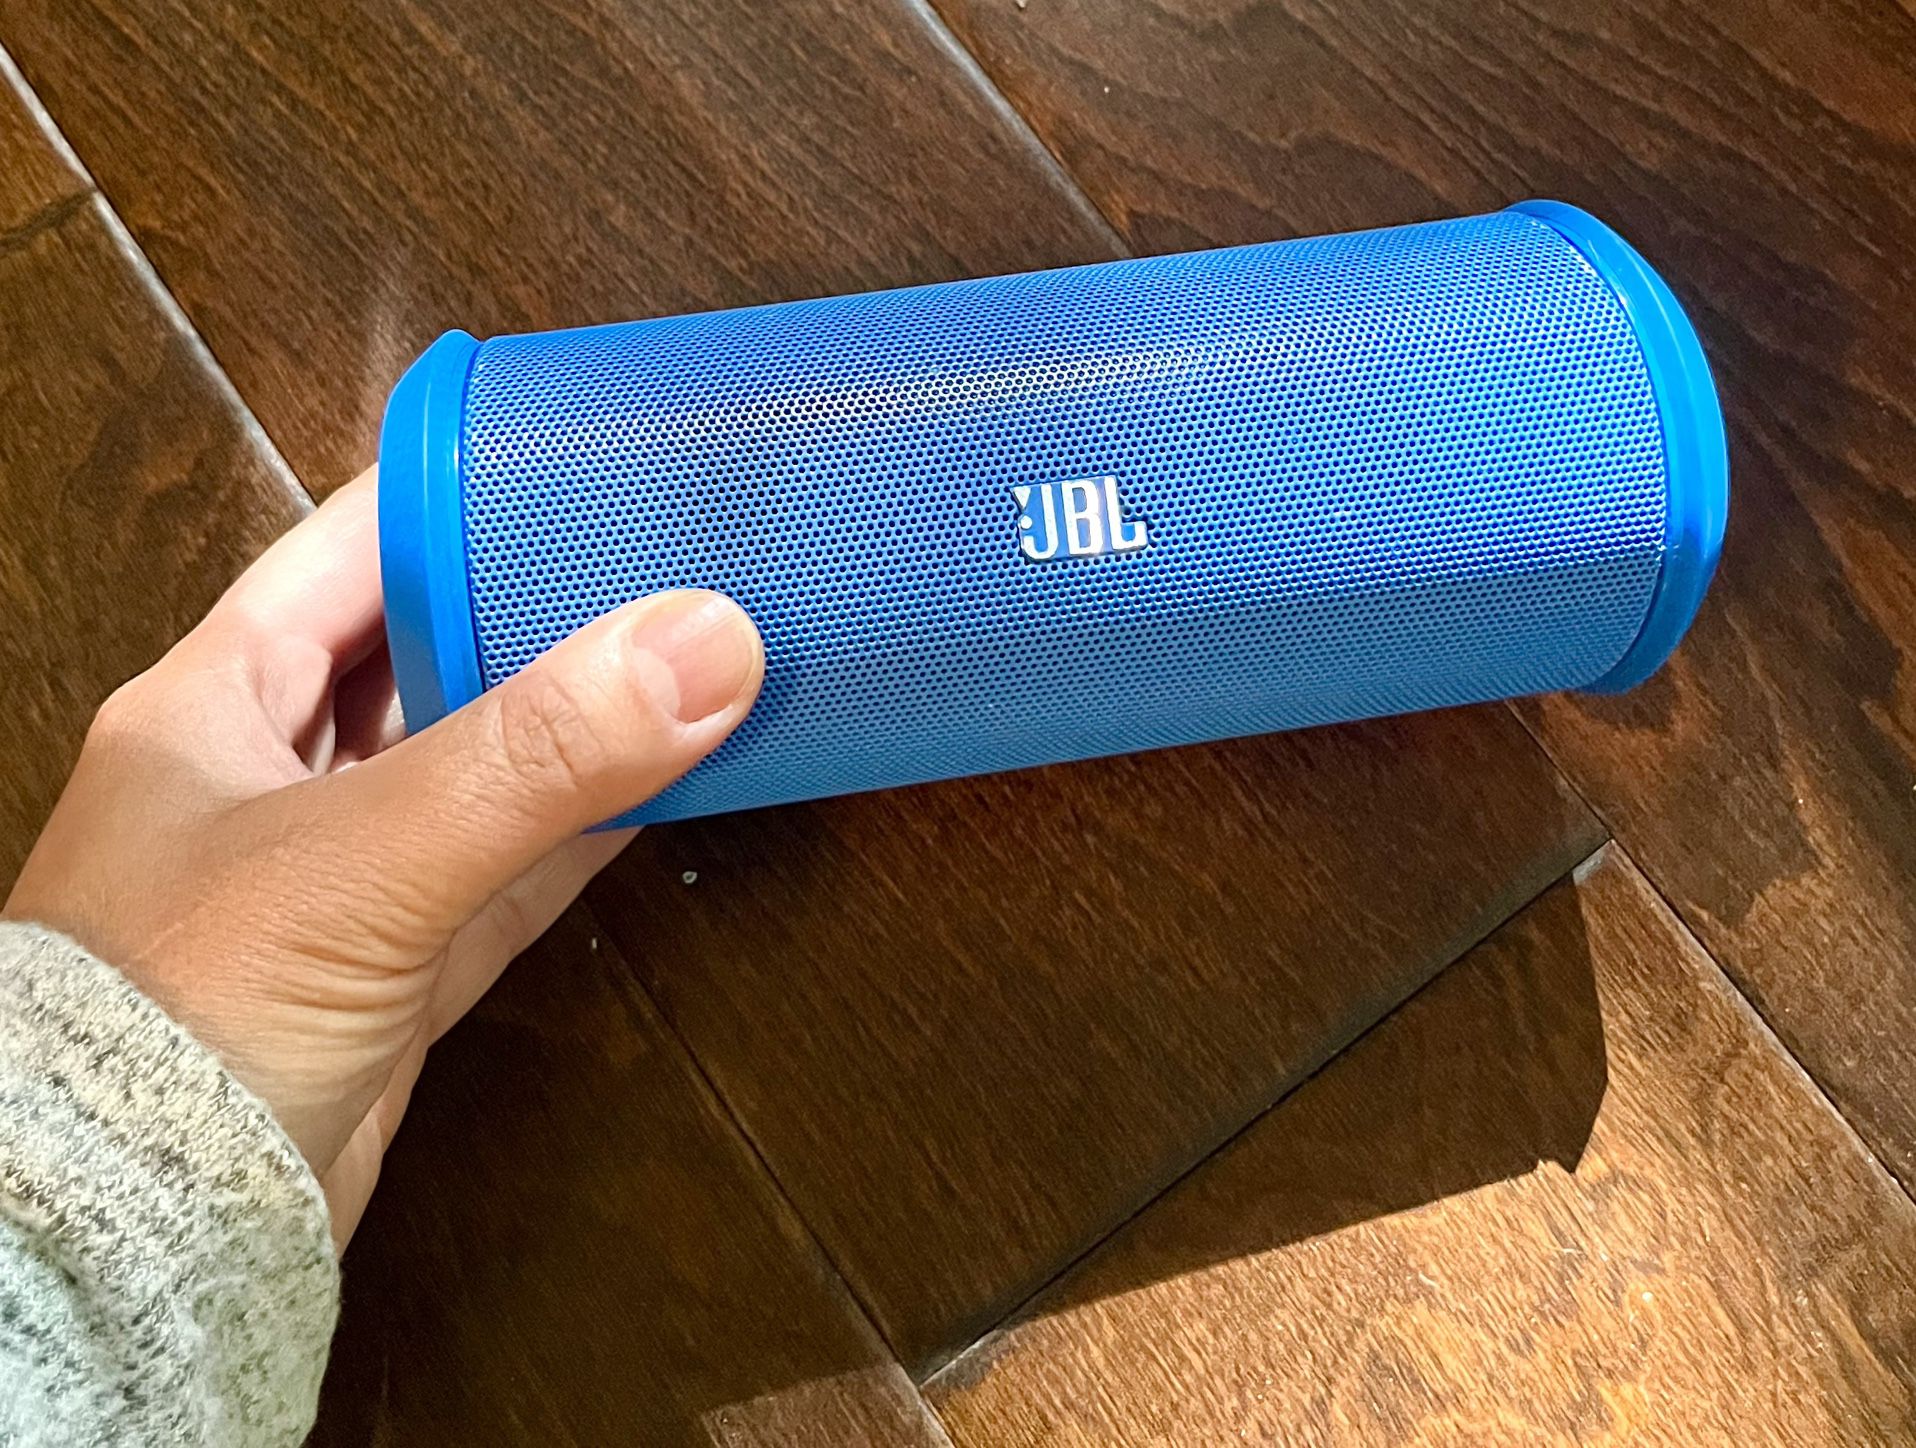 JBL Flip 2-Used in Great Condition! 